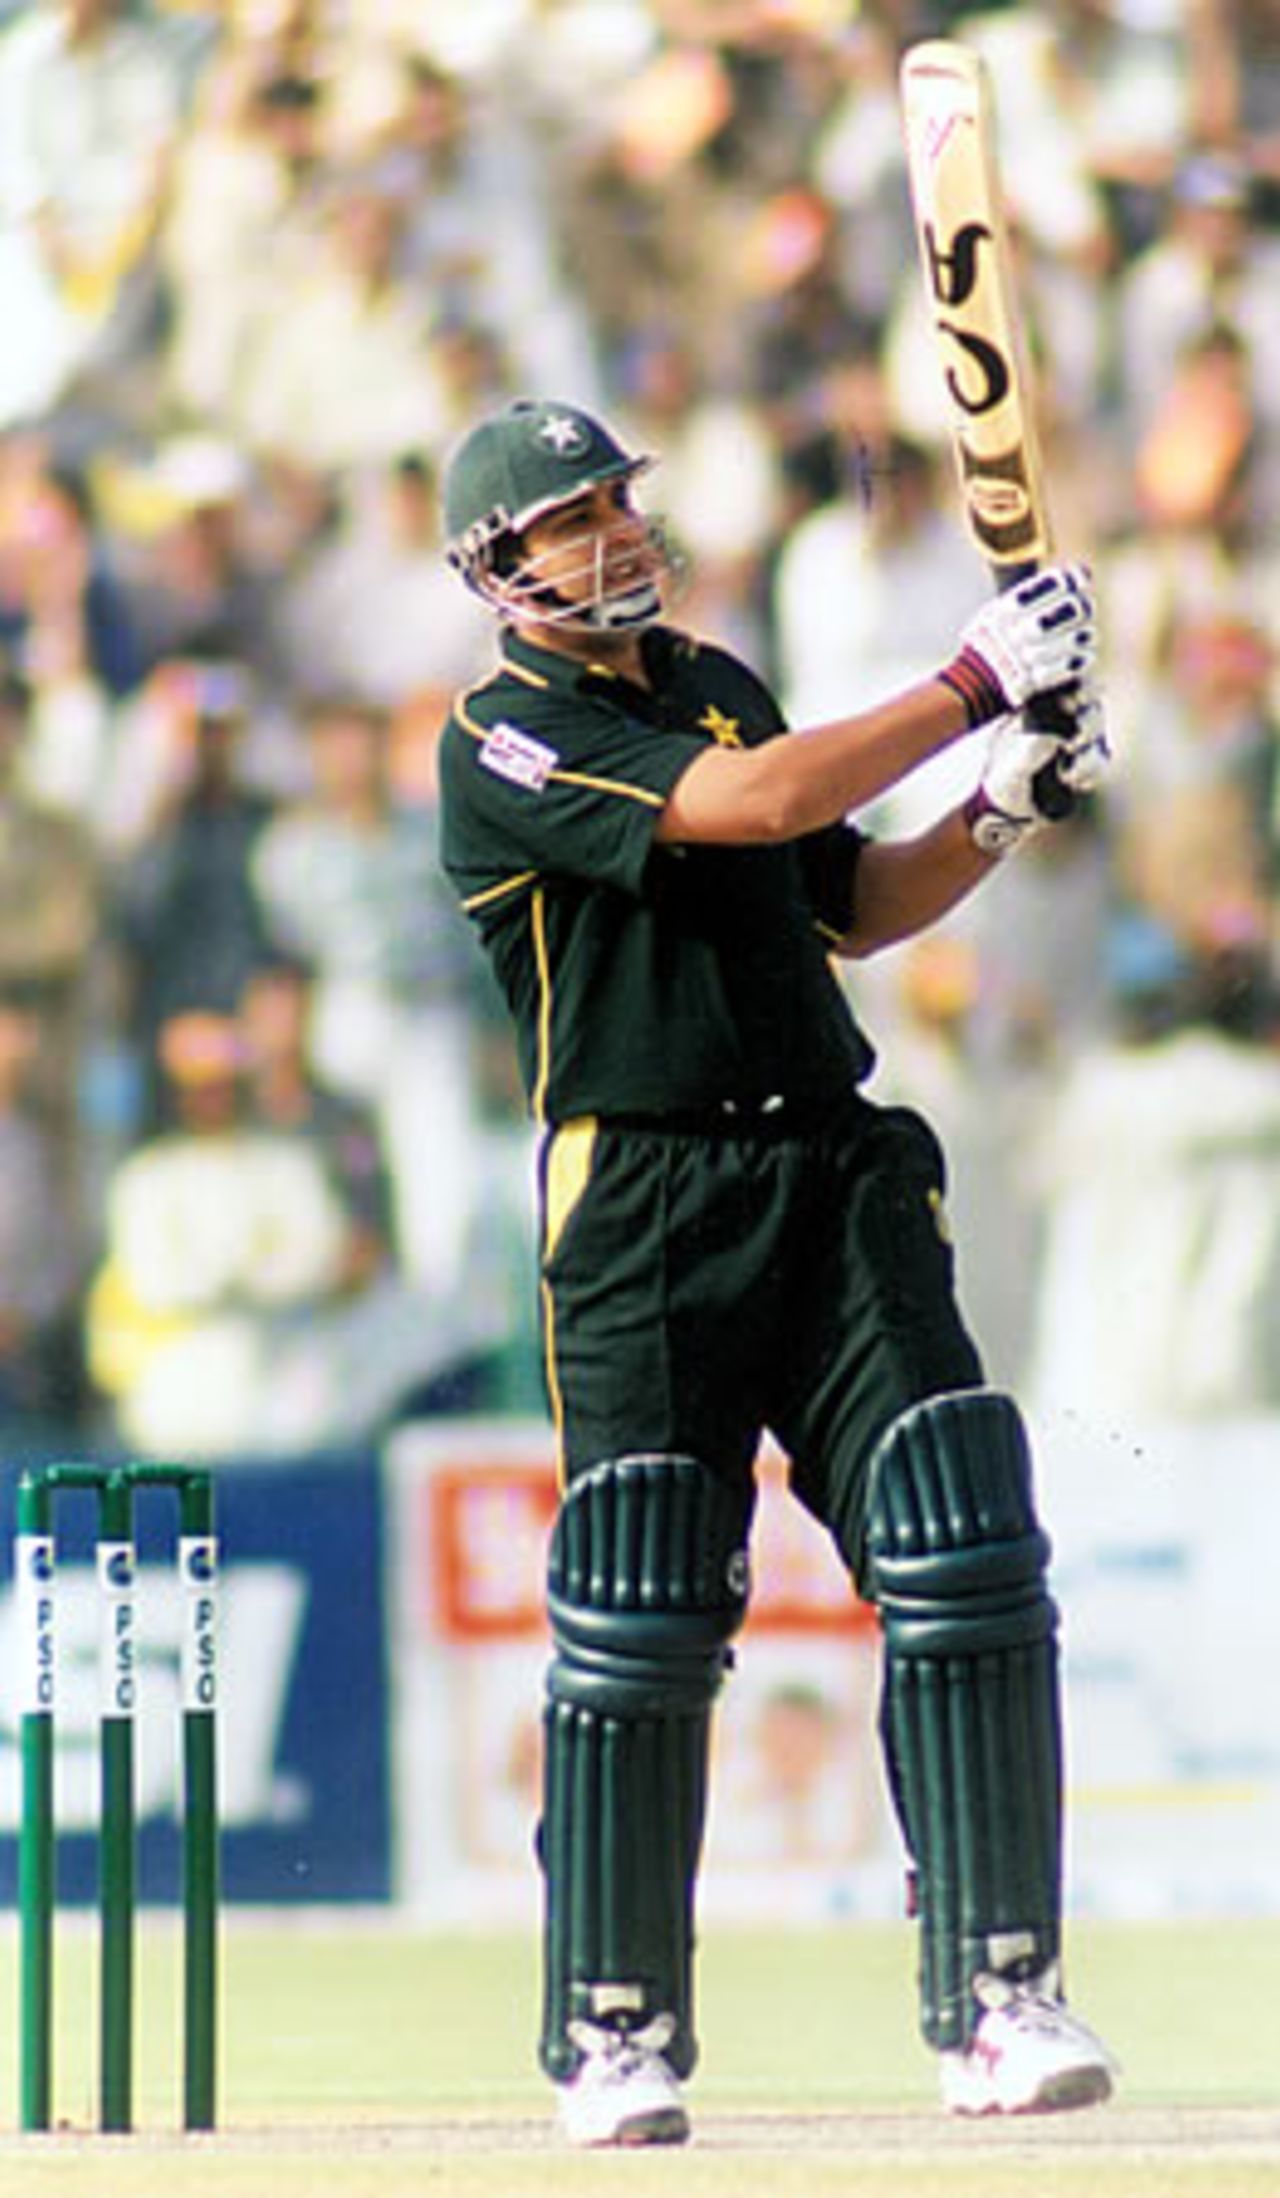 Inzamam has just hit a boundary - 3rd ODI at Lahore, New Zealand v Pakistan, 27 Apr 2002